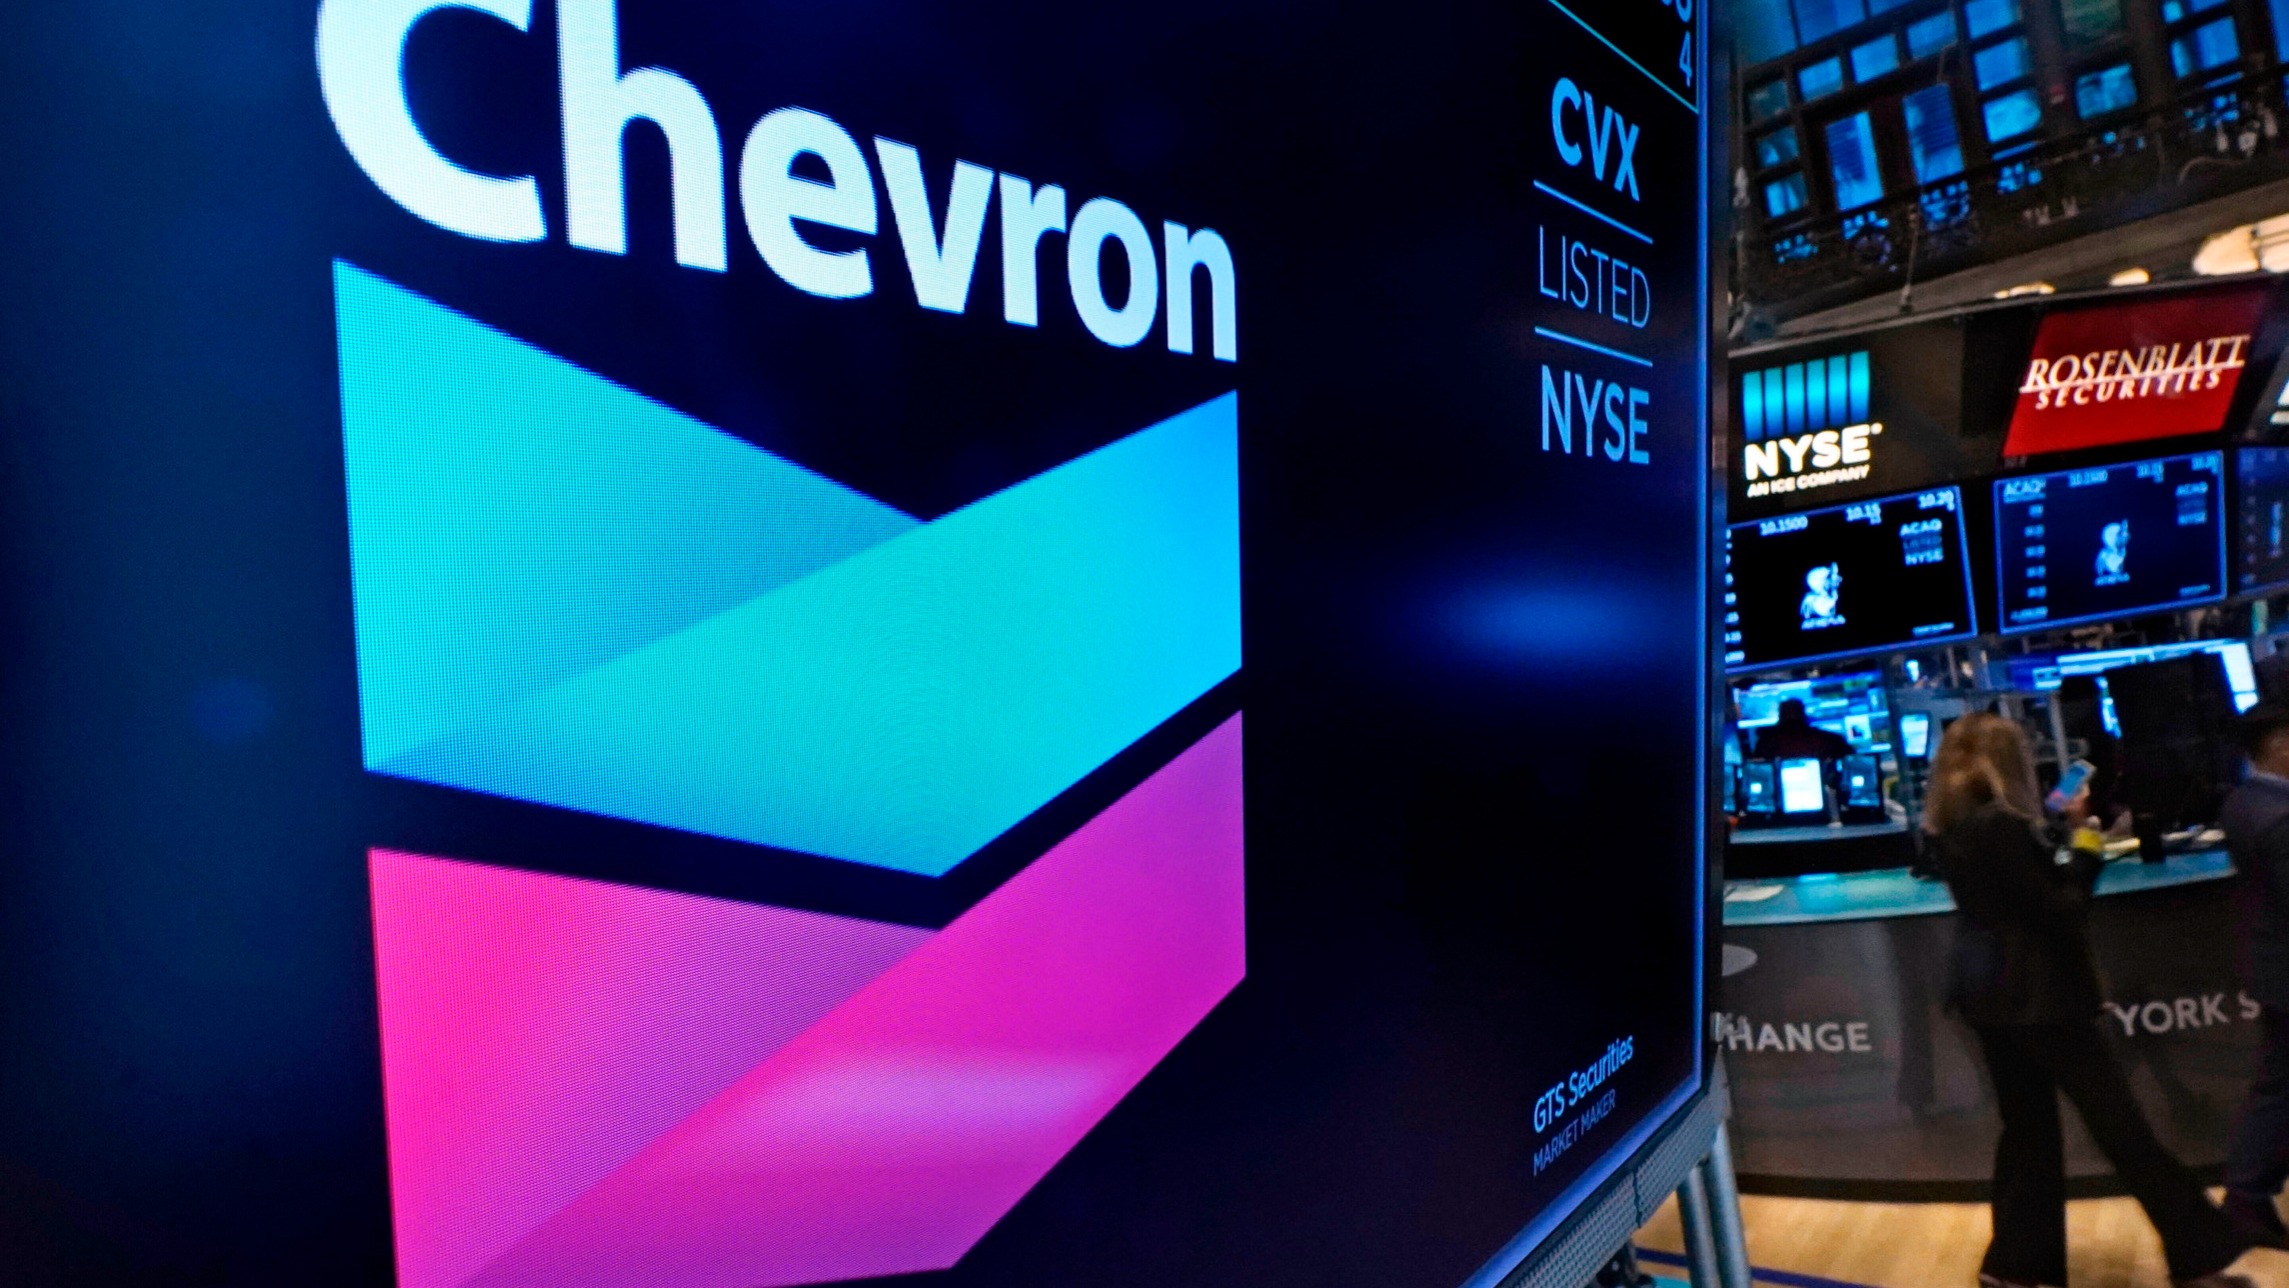 ft.com - Justin Jacobs - Chevron profits slip as oil and gas prices fall